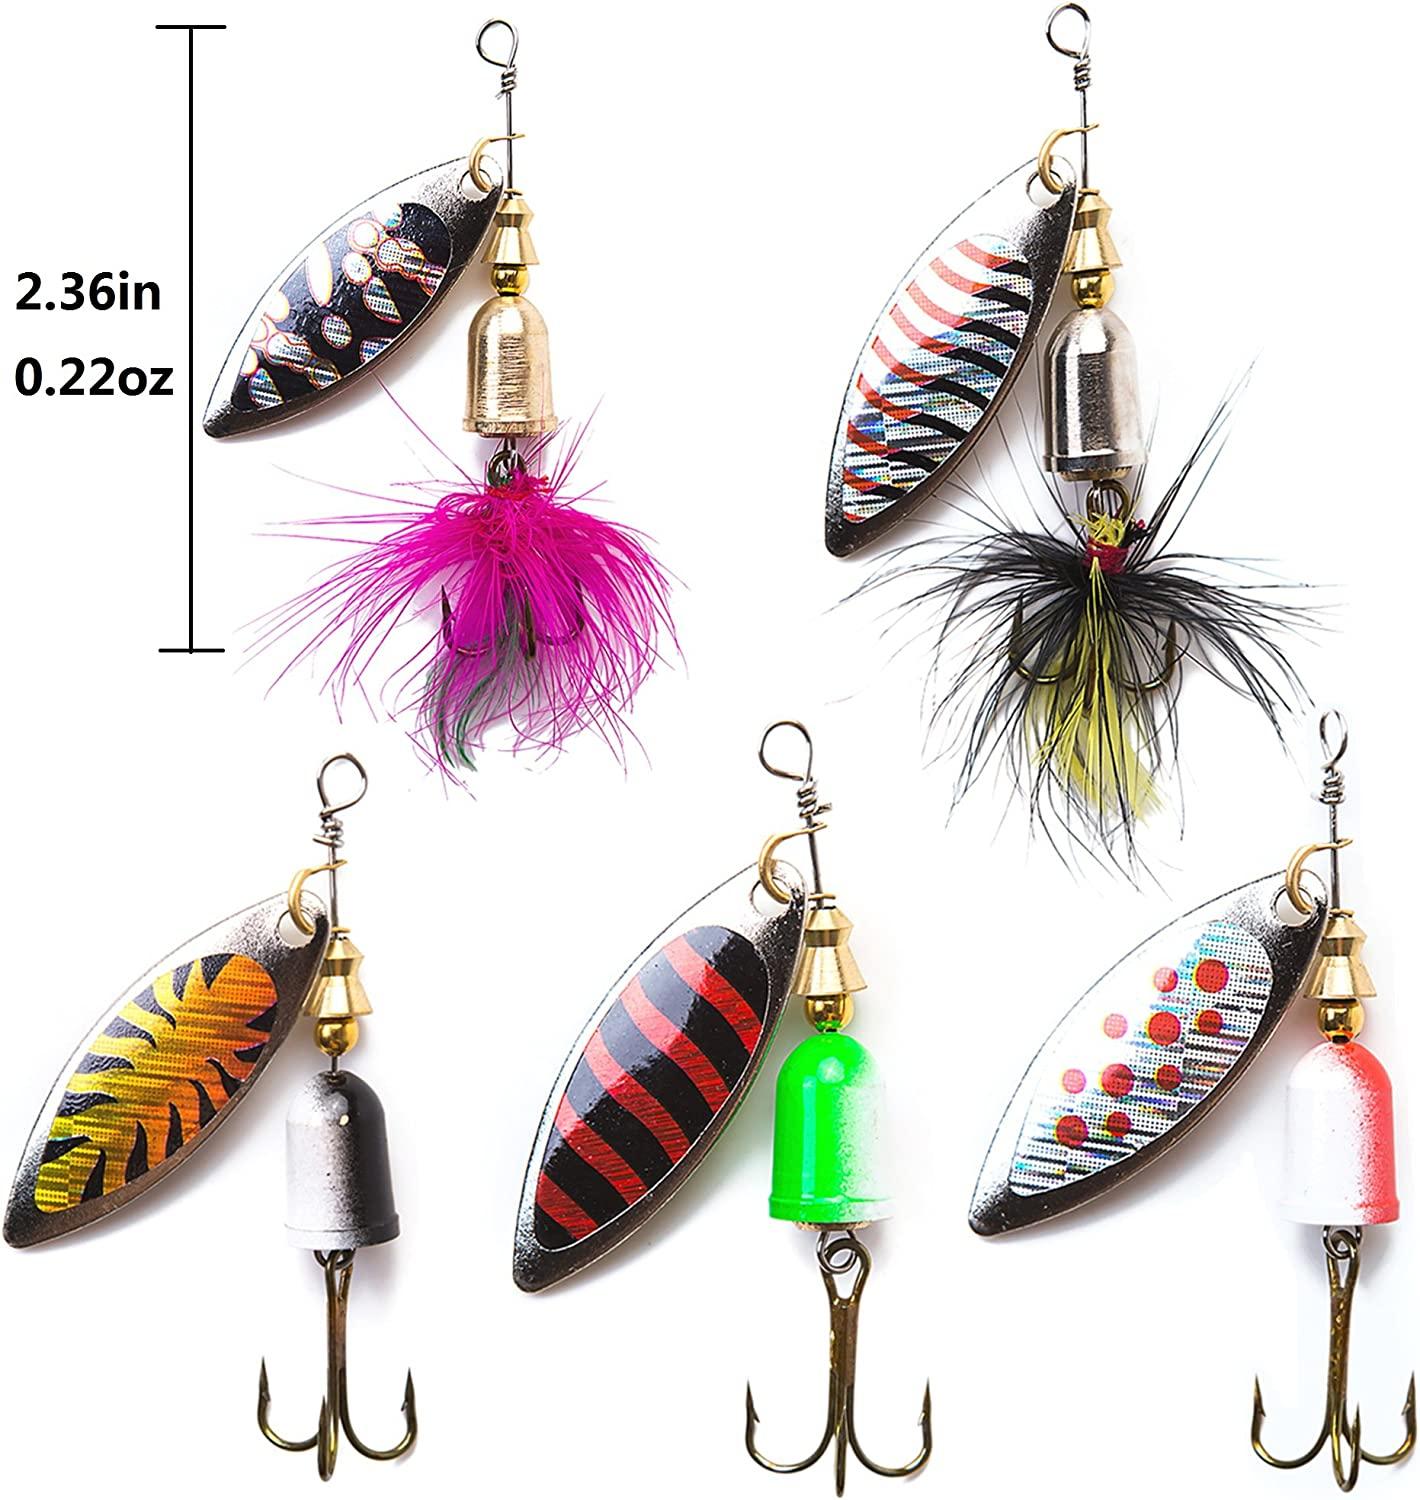 kingforest 5-10-20pcs Fishing Lures Spinnerbait for Bass Trout Salmon  Walleye Hard Metal Spinner Baits Kit with Tackle Box 10pcs